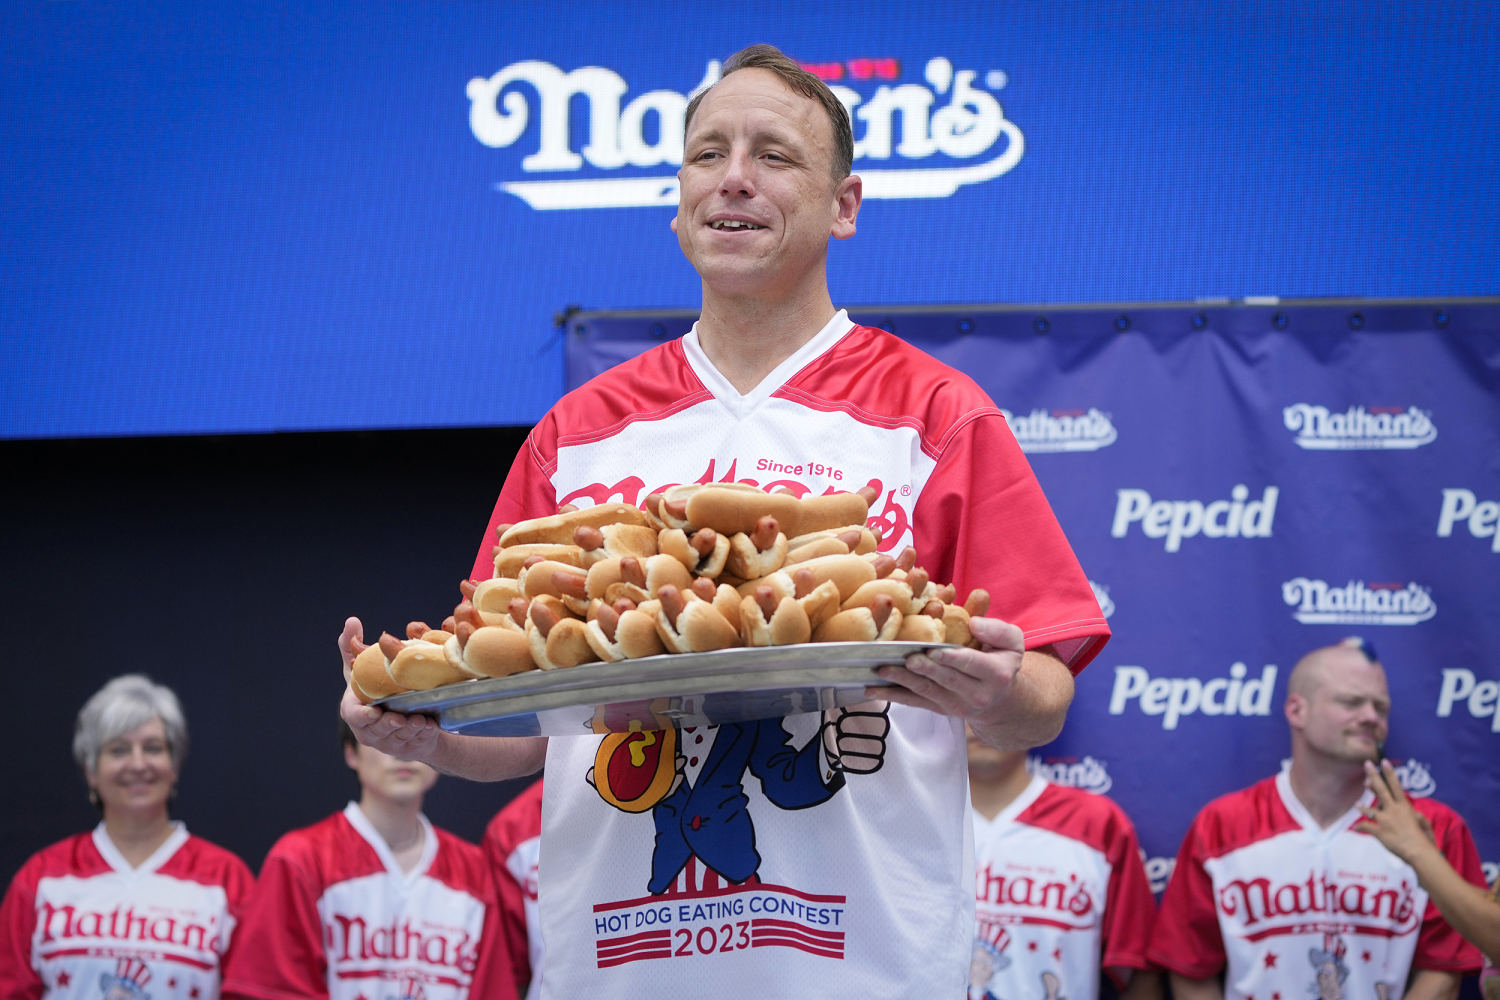 The drama at the heart of America’s most iconic Fourth of July hot dog contest